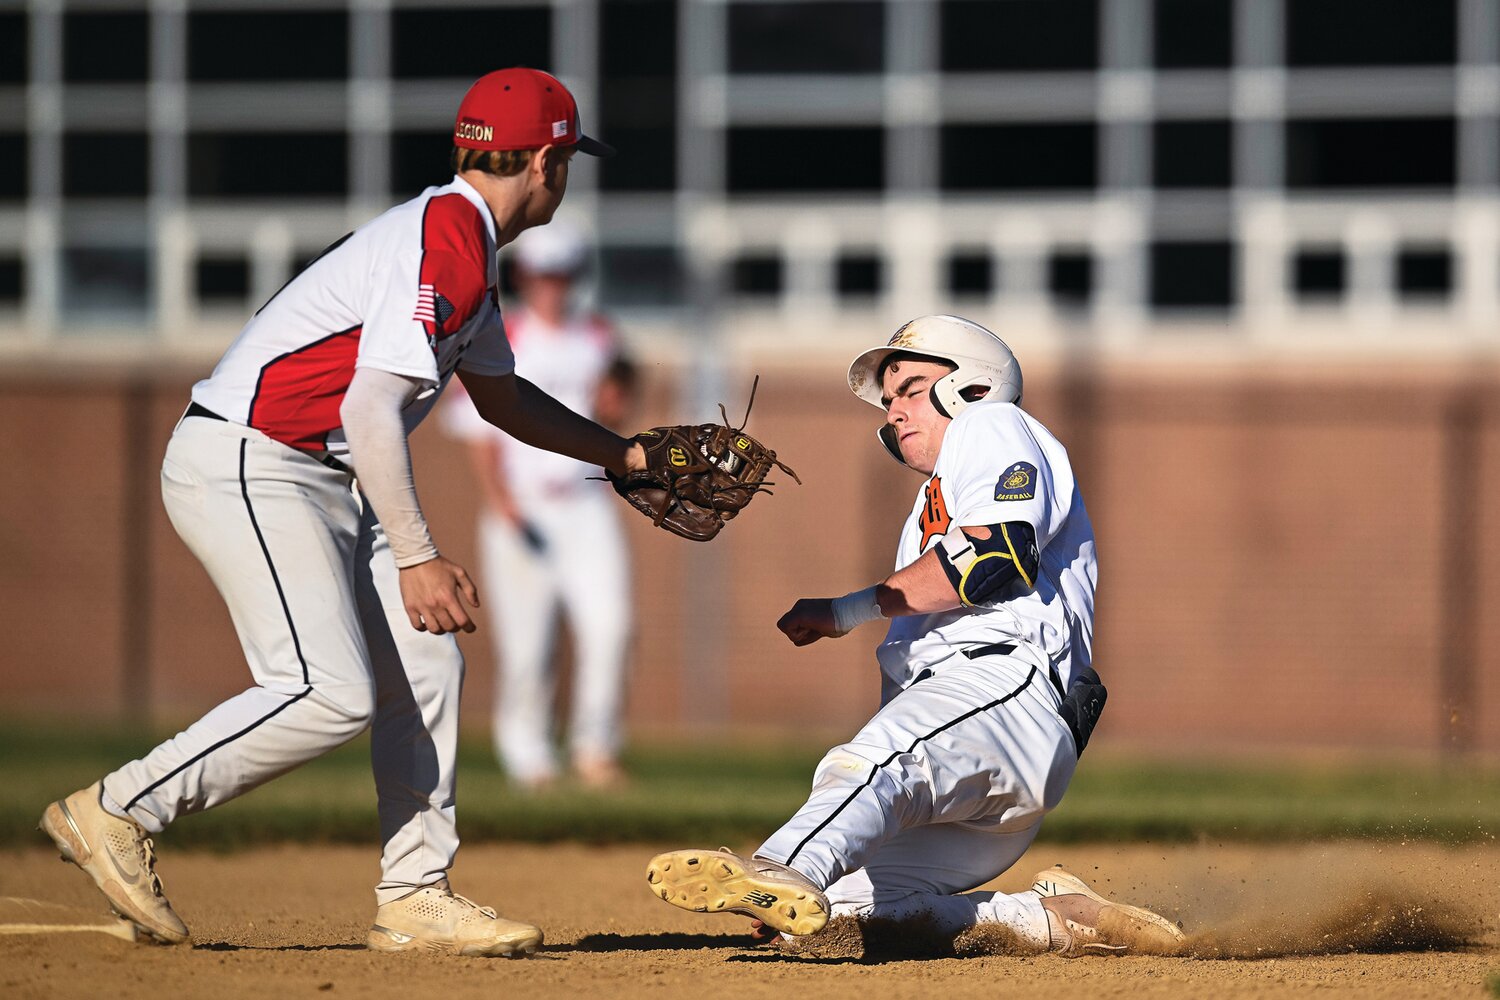 Souderton’s Ranger Kling tags out Doylestown’s Matthew Sharkey while trying to advance to second base on an infield hit.